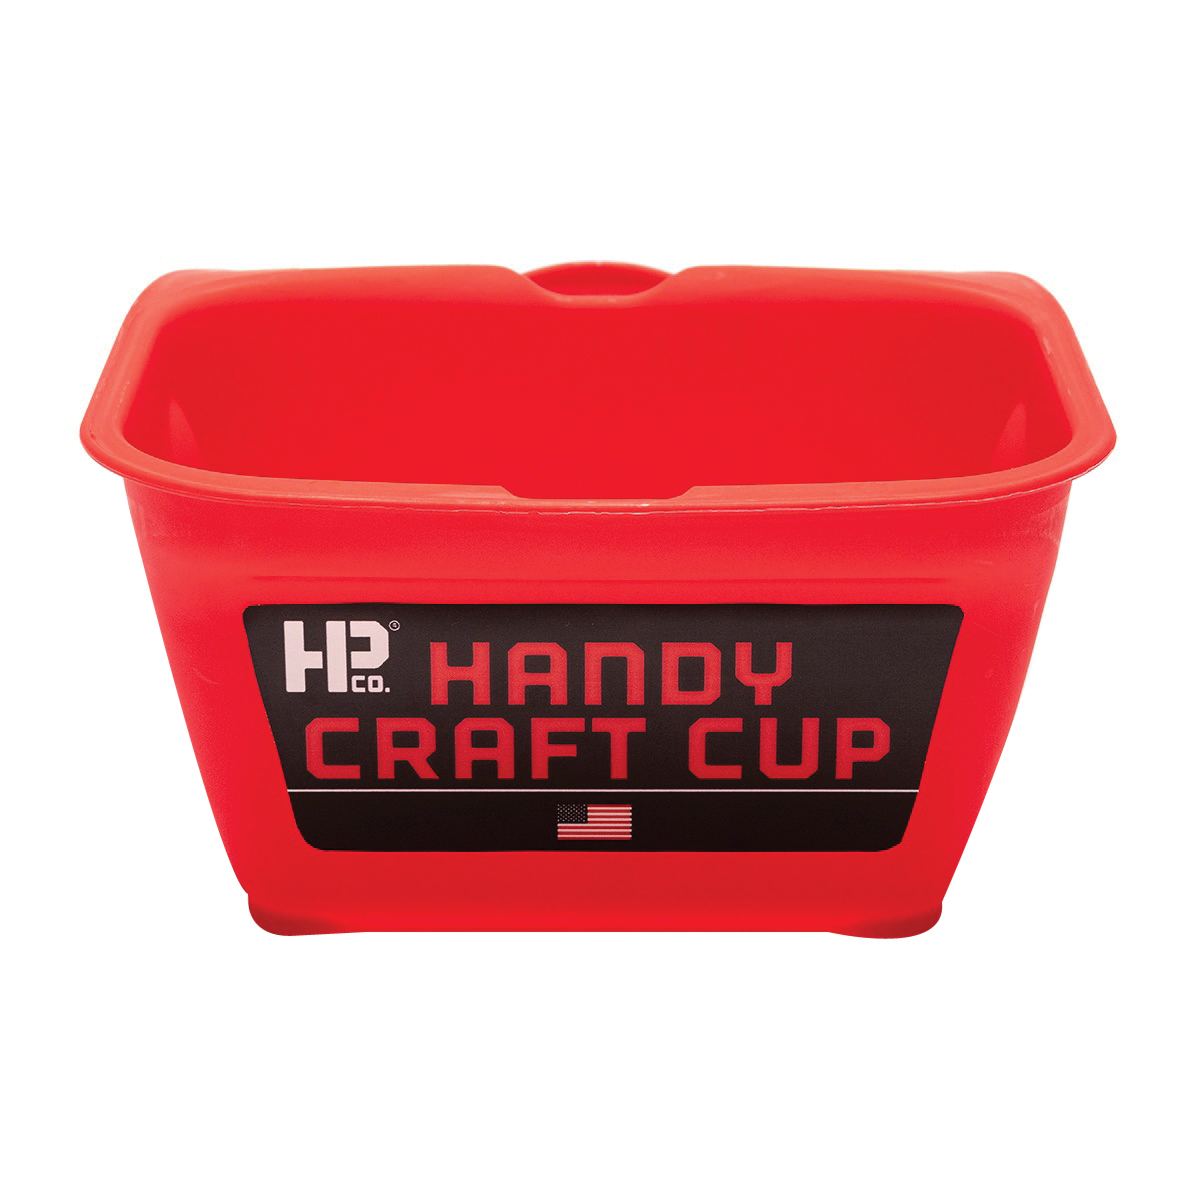 1100-CC Craft Cup, 8 oz Capacity, Red